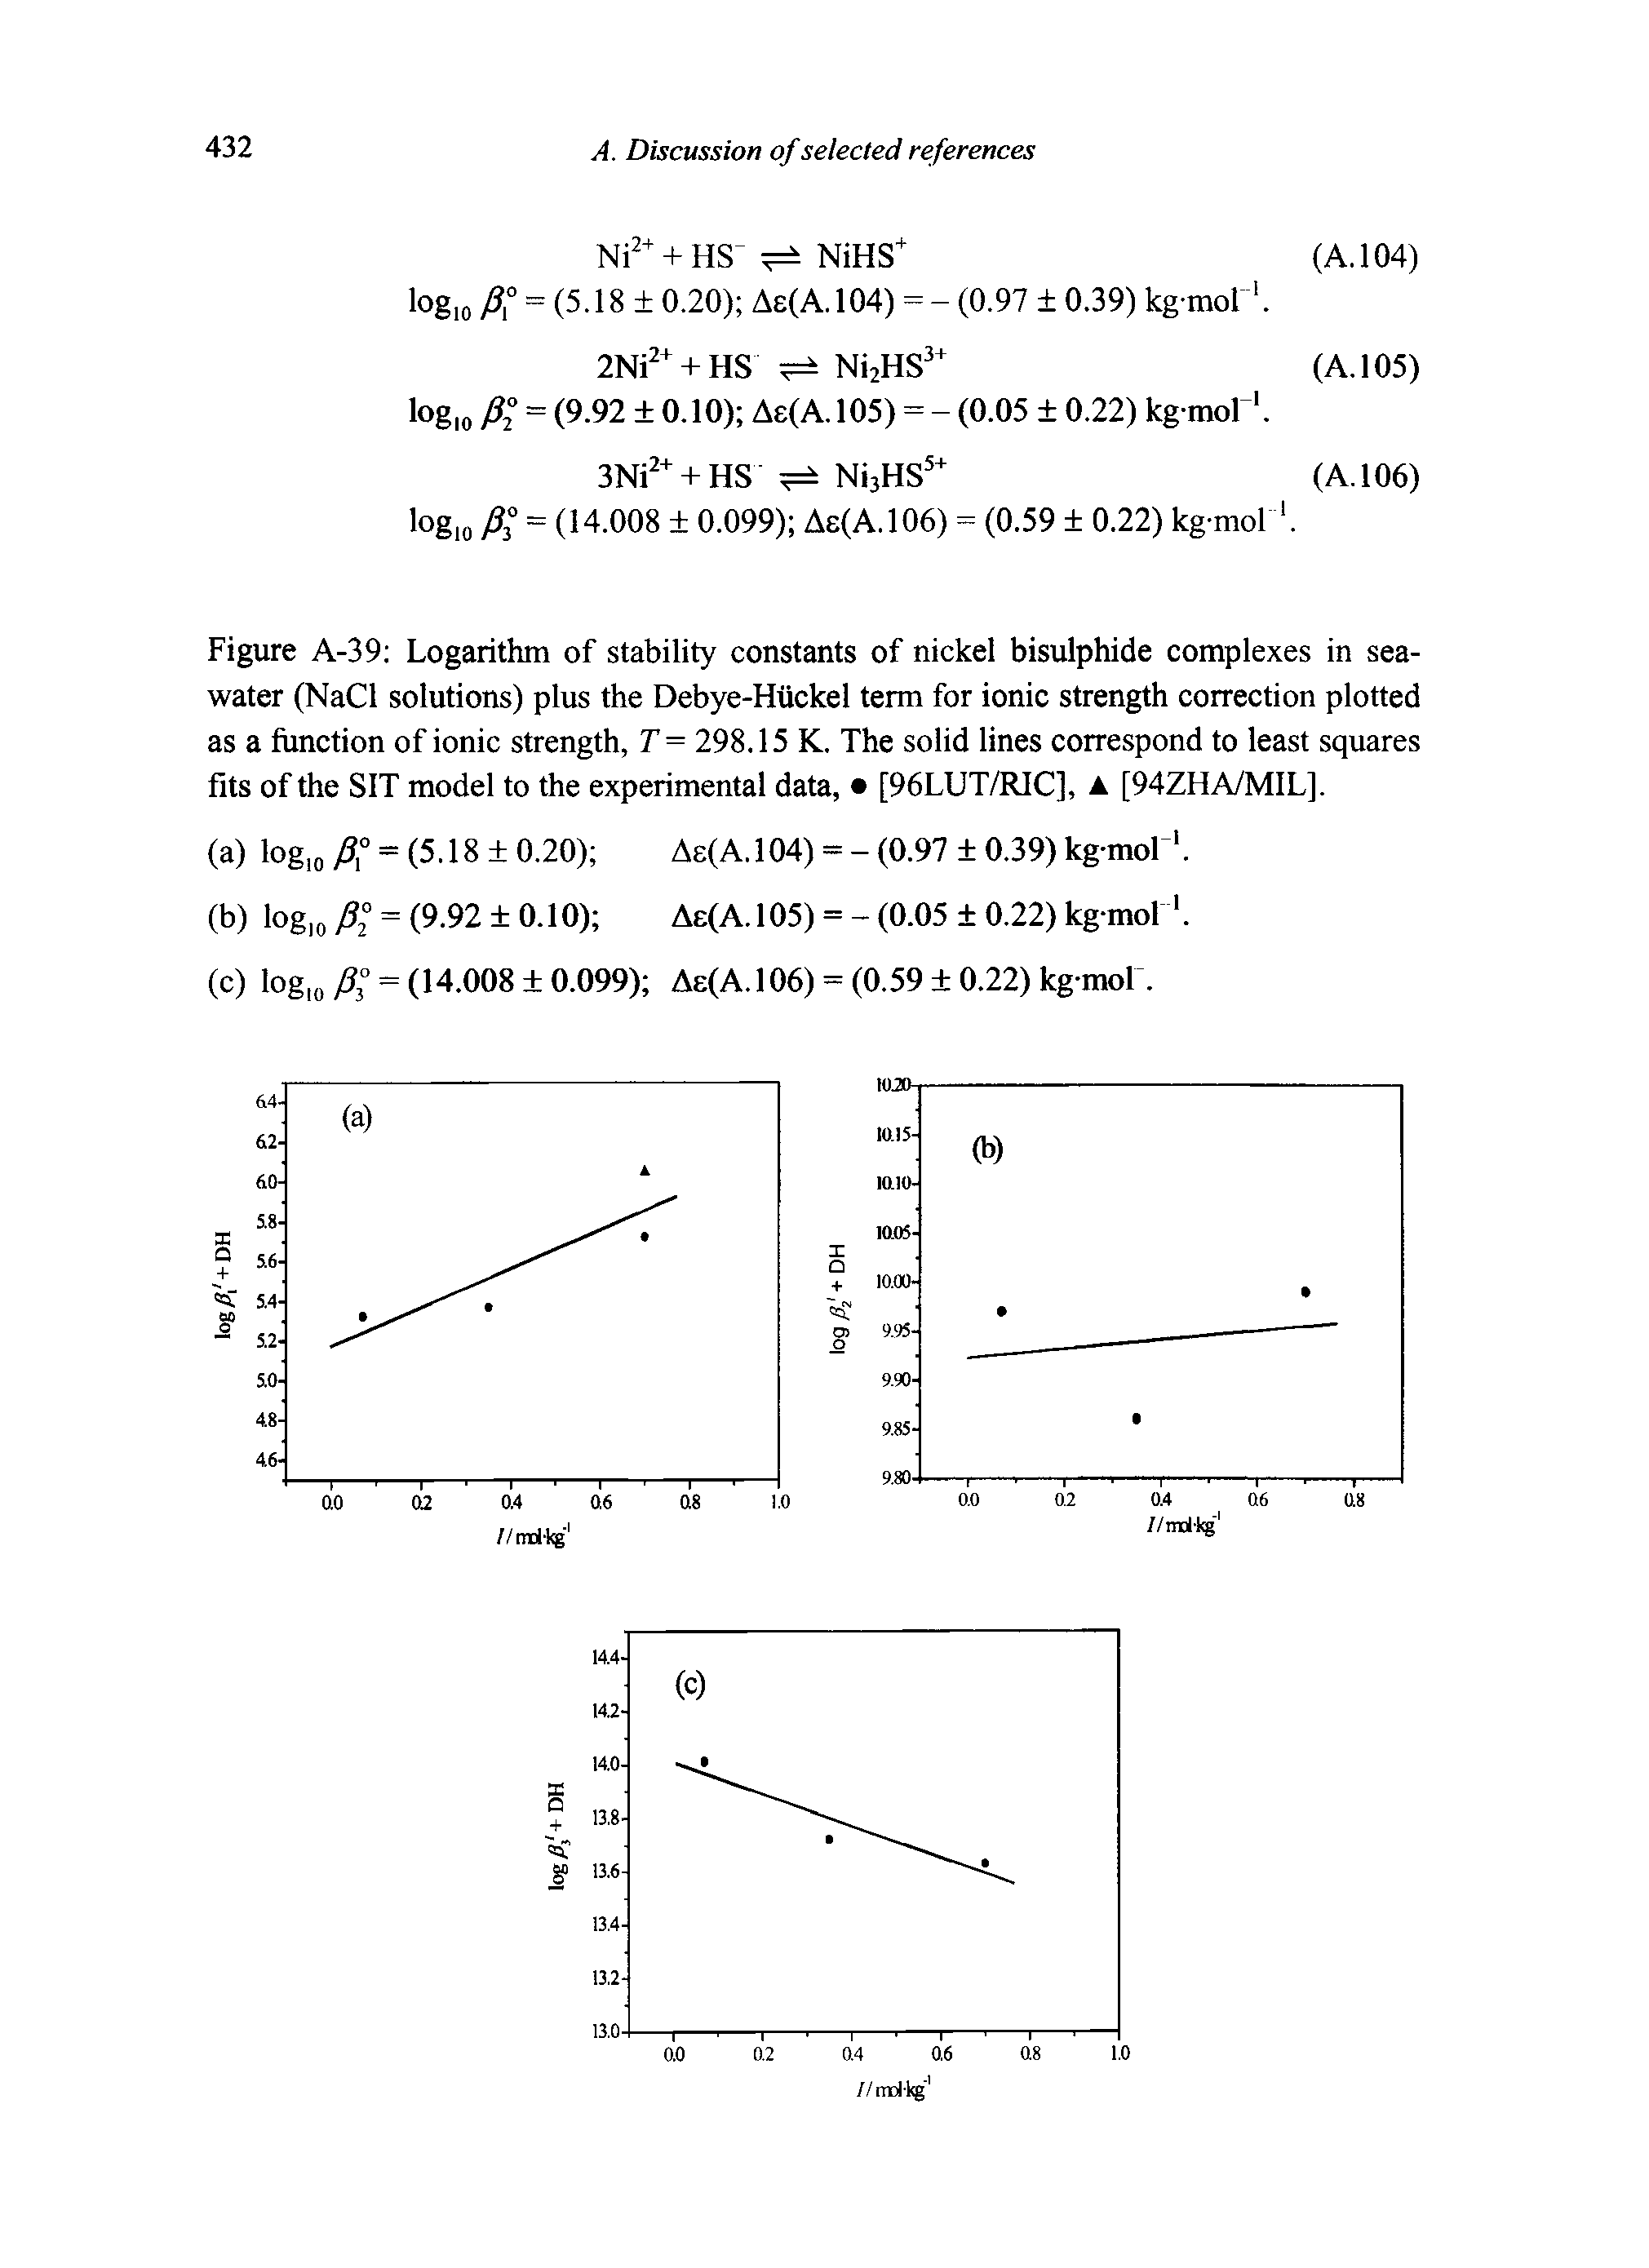 Figure A-39 Logarithm of stability constants of nickel bisulphide complexes in seawater (NaCl solutions) plus the Debye-Hiickel term for ionic strength correction plotted as a function of ionic strength, T= 298.15 K. The solid lines correspond to least squares fits of the SIT model to the experimental data, [96LUT/RIC], A [94ZHA/MIL].